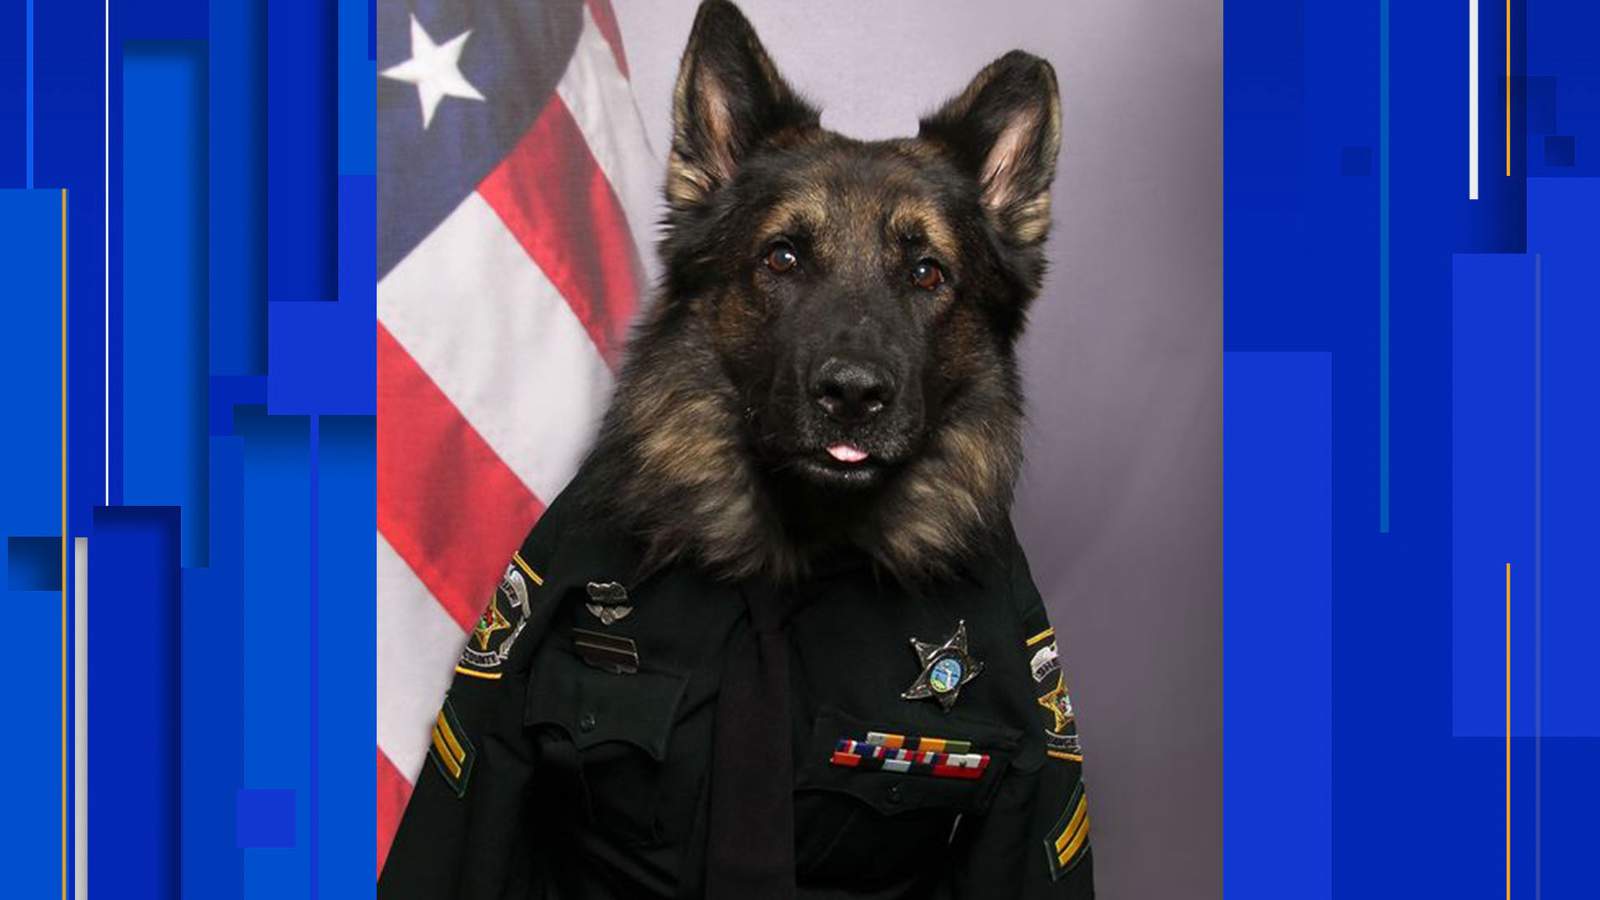 Internet is loving this Florida K-9 officer who wore tie for ID badge photo